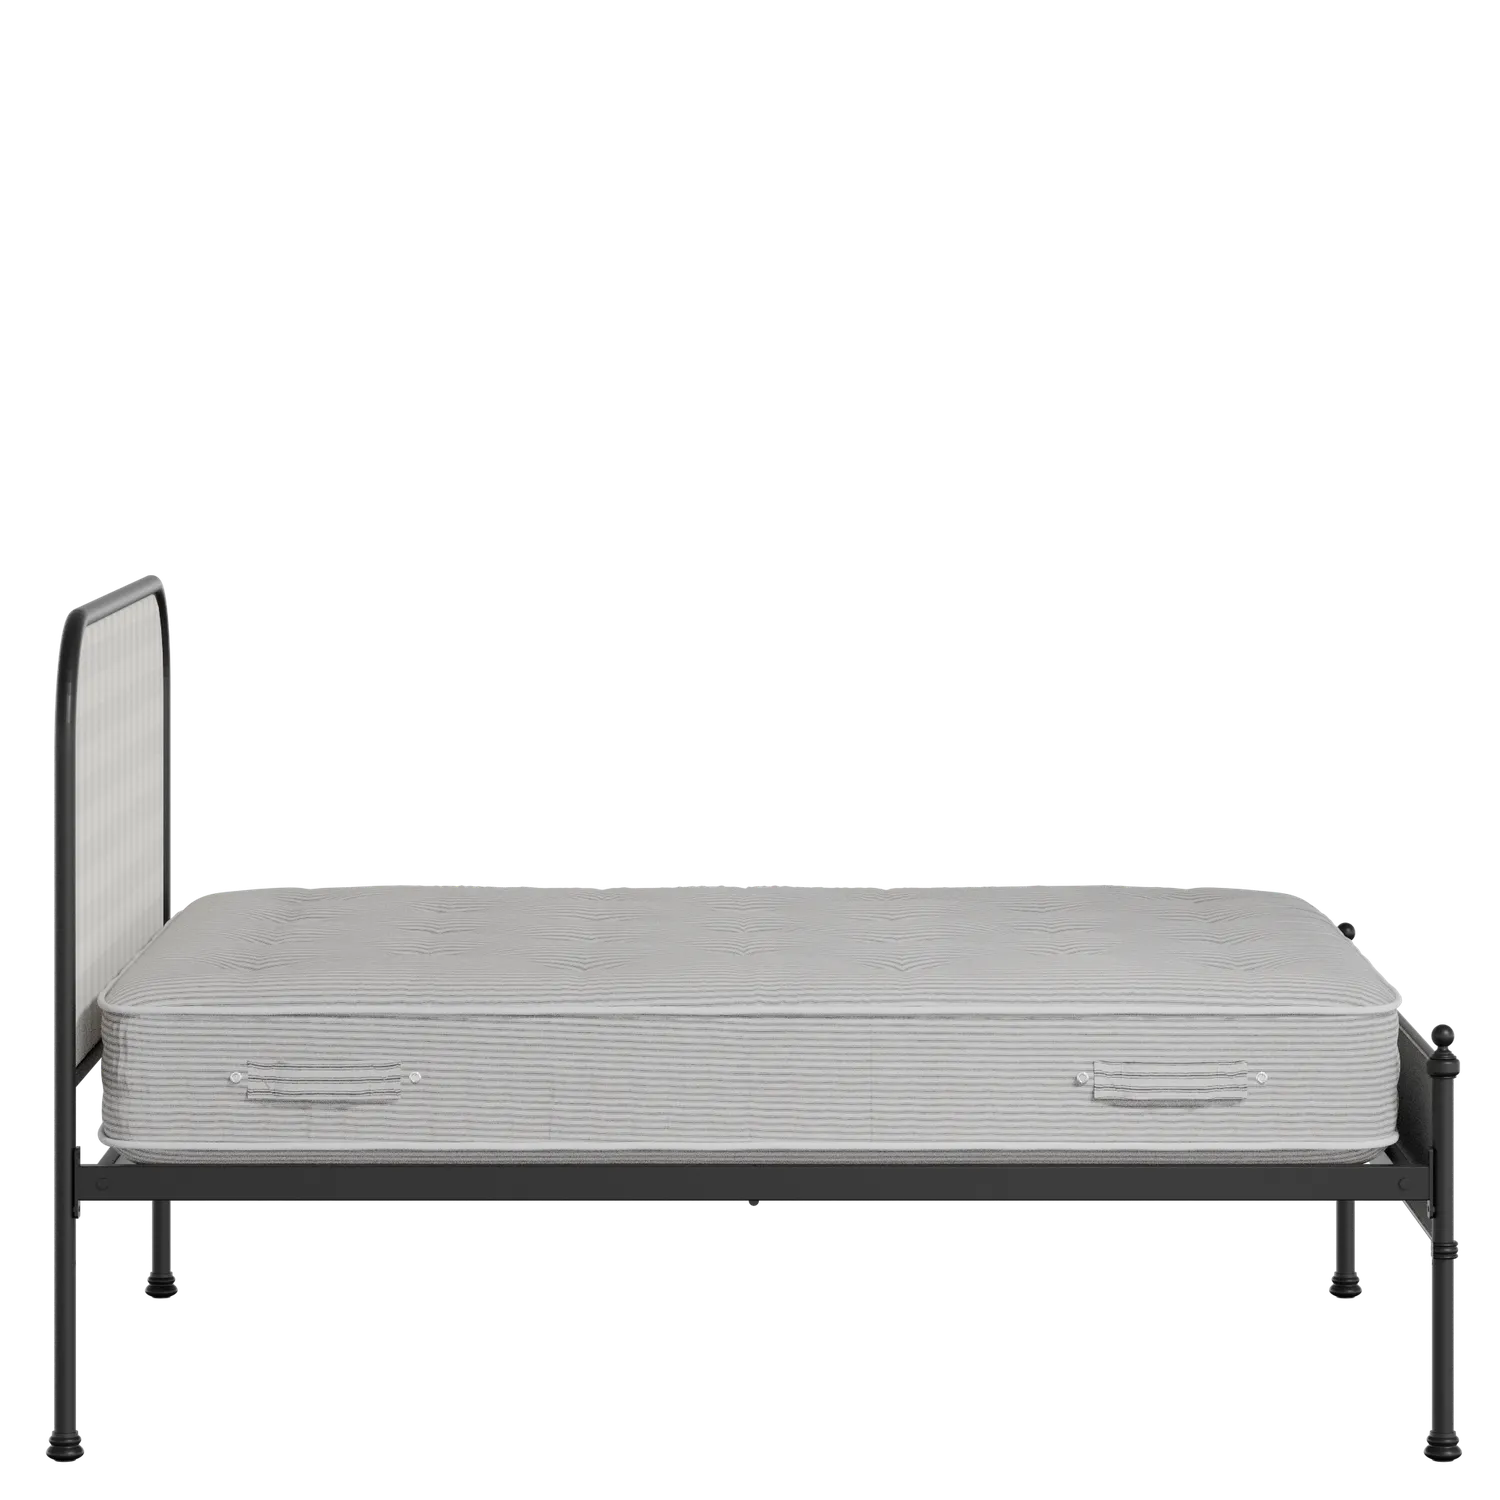 Bray Slim iron/metal upholstered bed in black with Romo Kemble Putty fabric